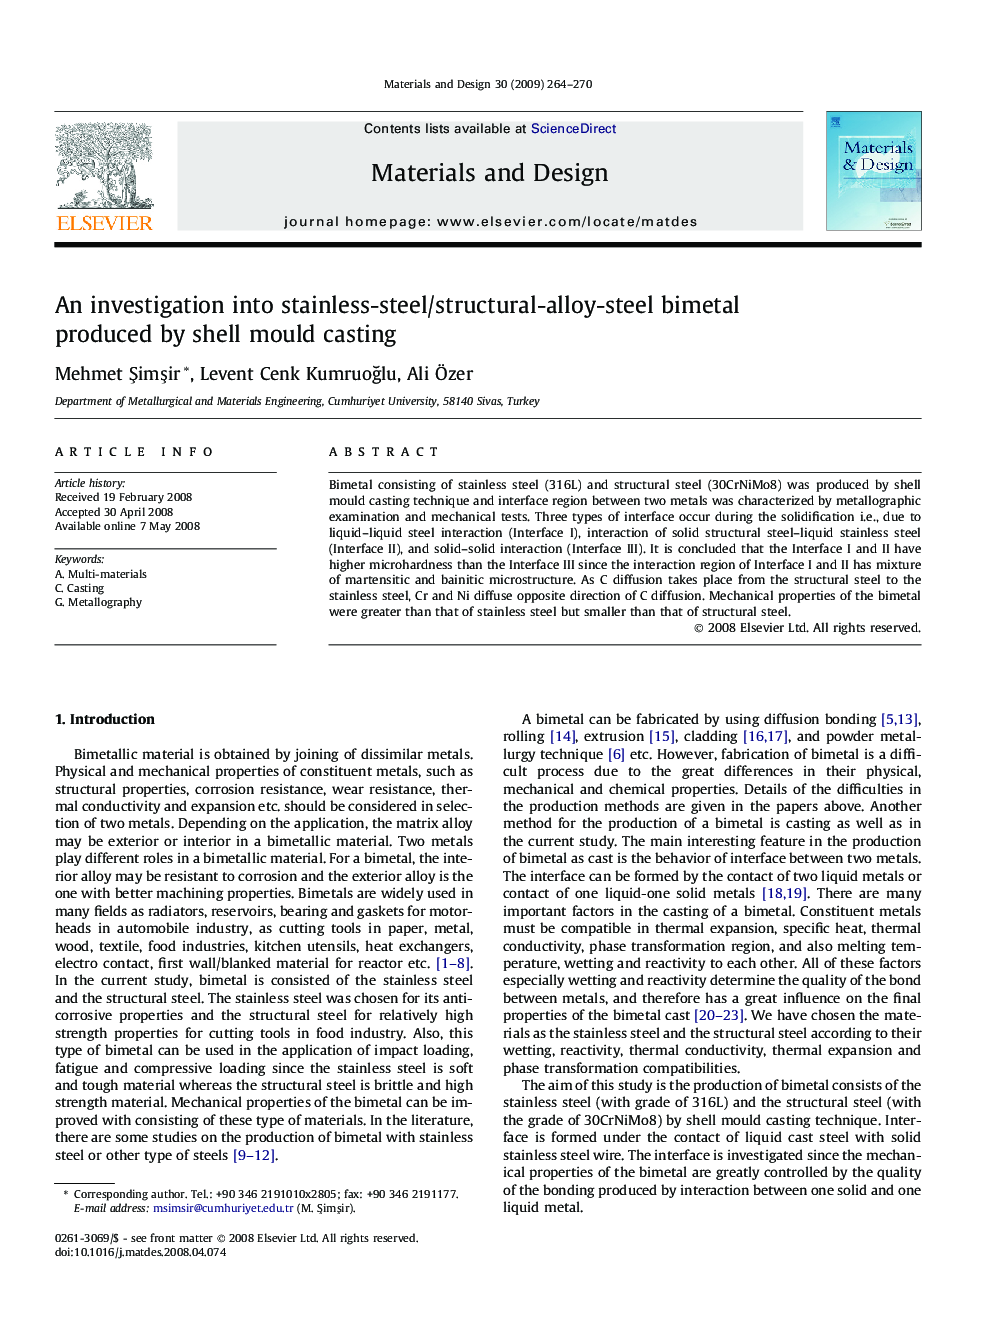 An investigation into stainless-steel/structural-alloy-steel bimetal produced by shell mould casting